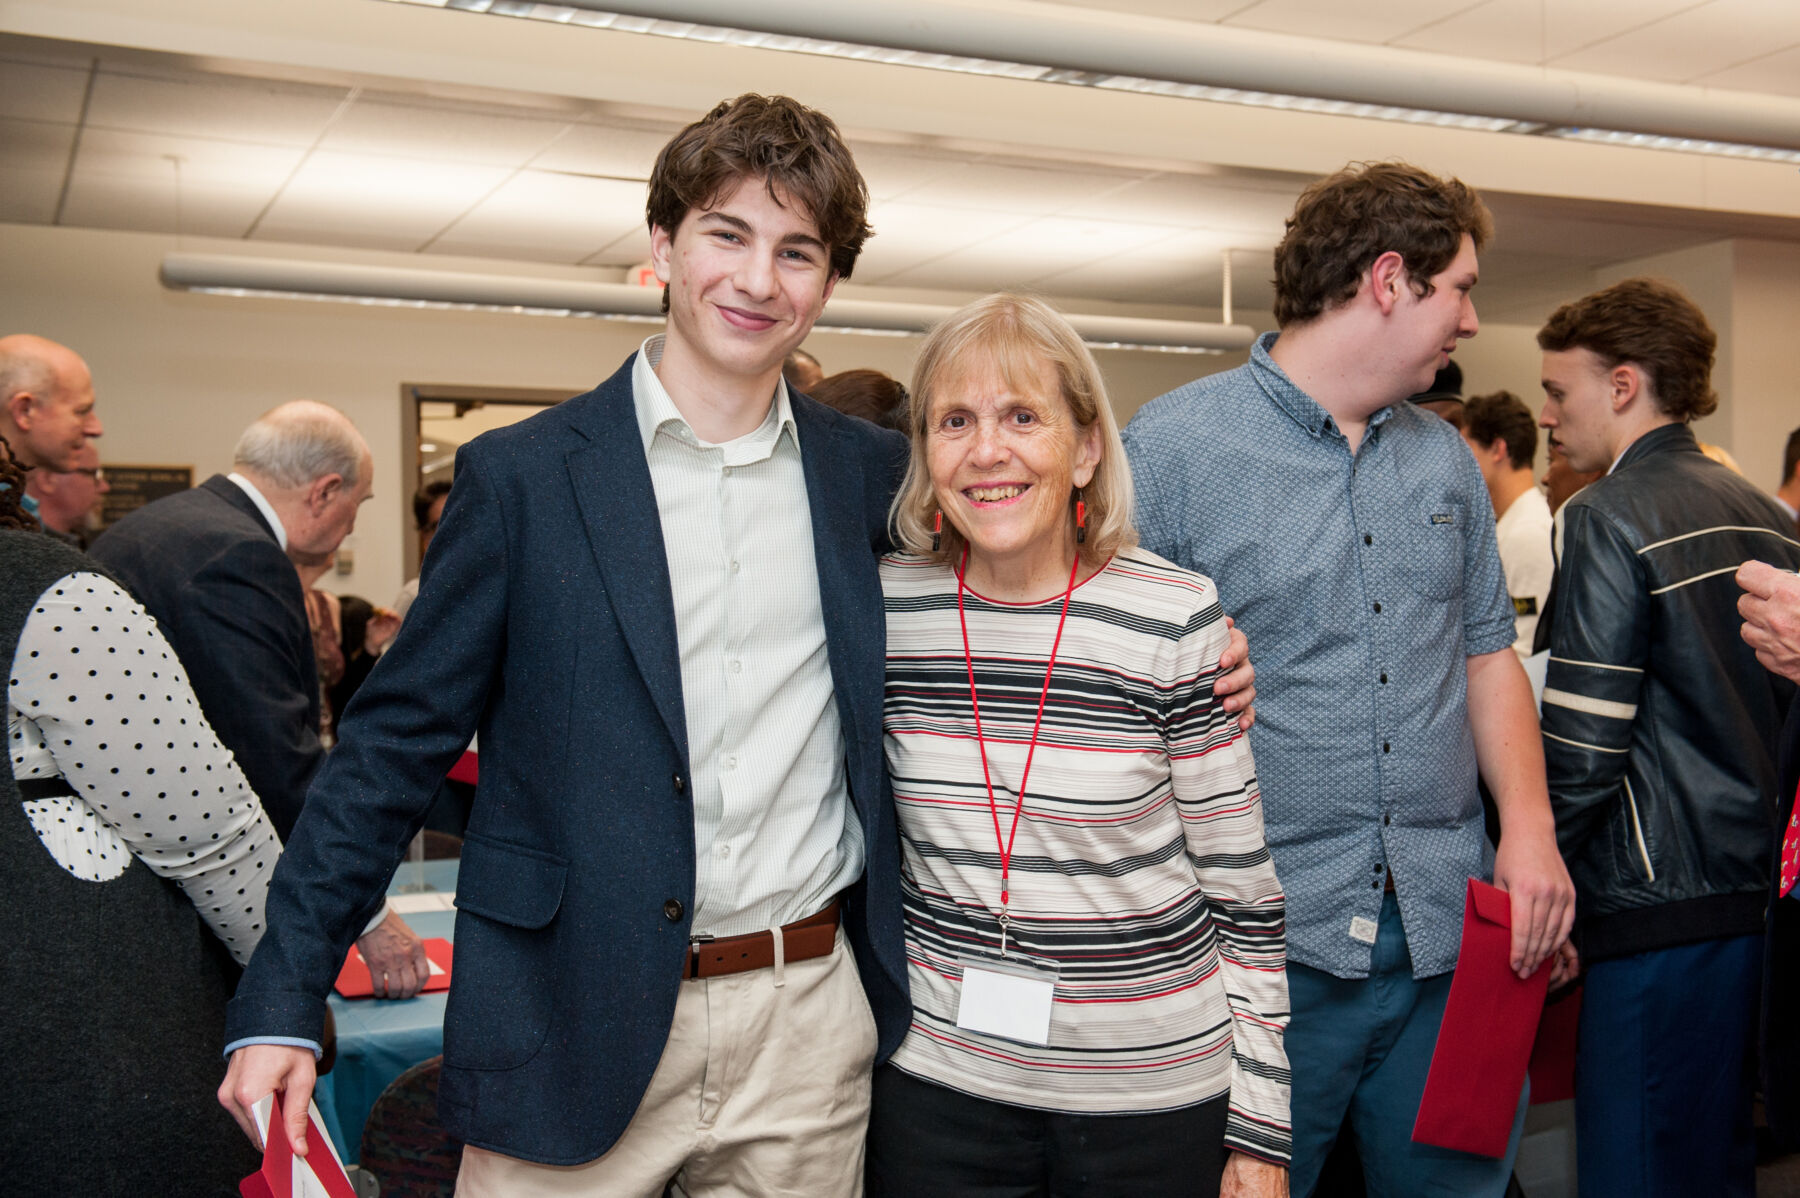 Two people put their arms around each other for a photograph: a young student (left) wearing a dark blazer and smiling, and BCF Scholarship Committee Chair Ann Coles (right) who is wearing a striped sweater.